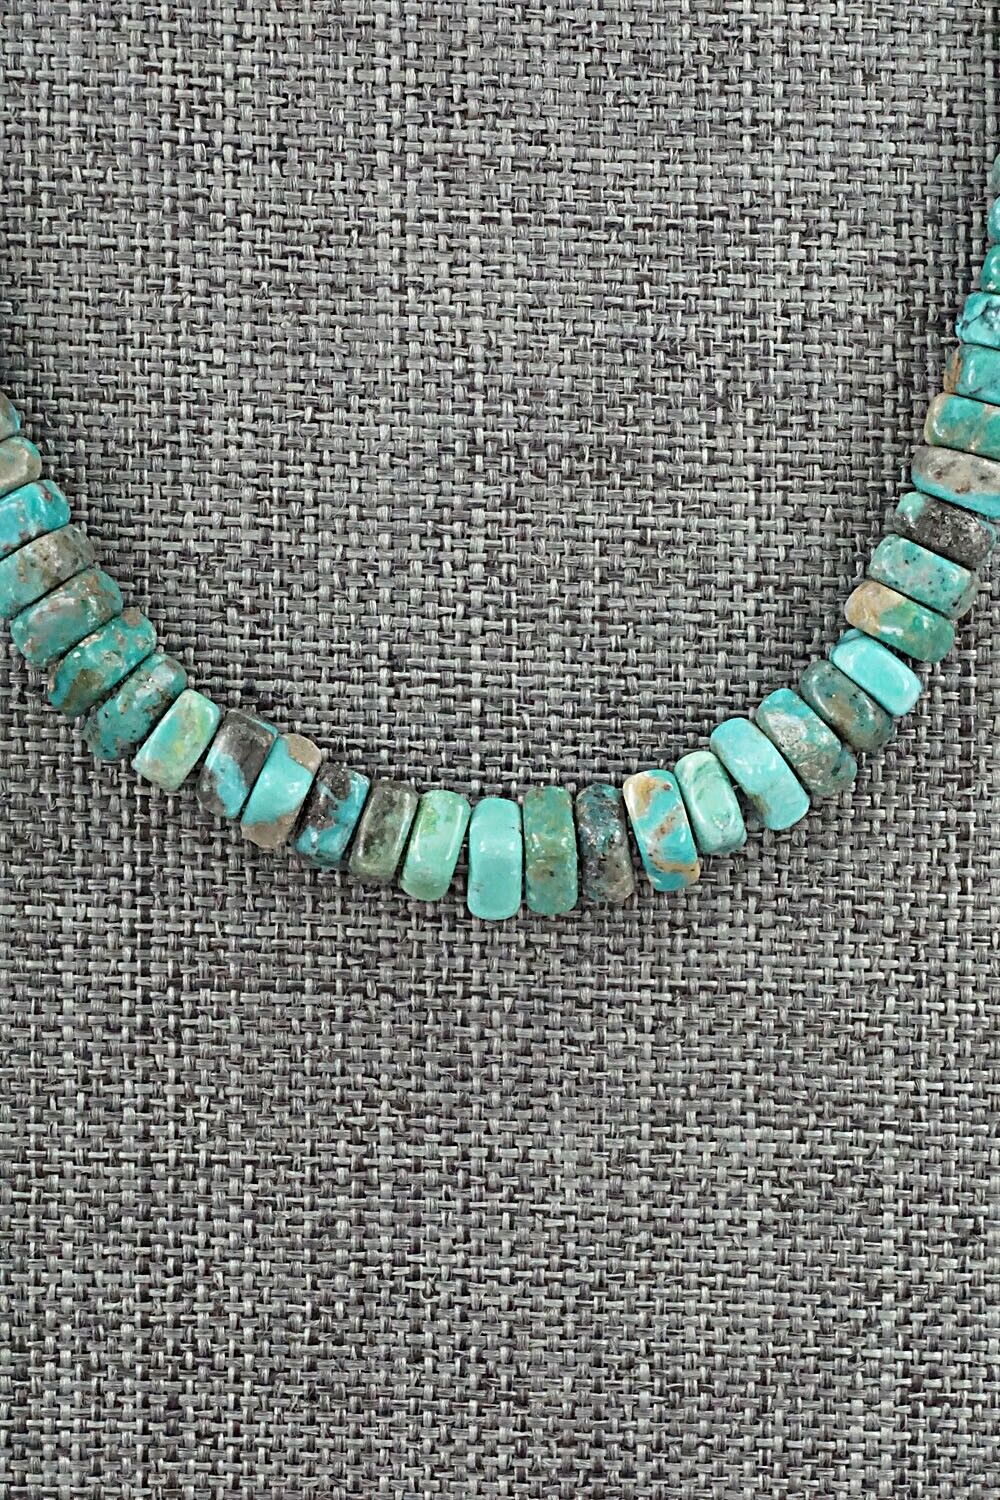 Turquoise & Sterling Silver Necklace 18" - Doreen Jake